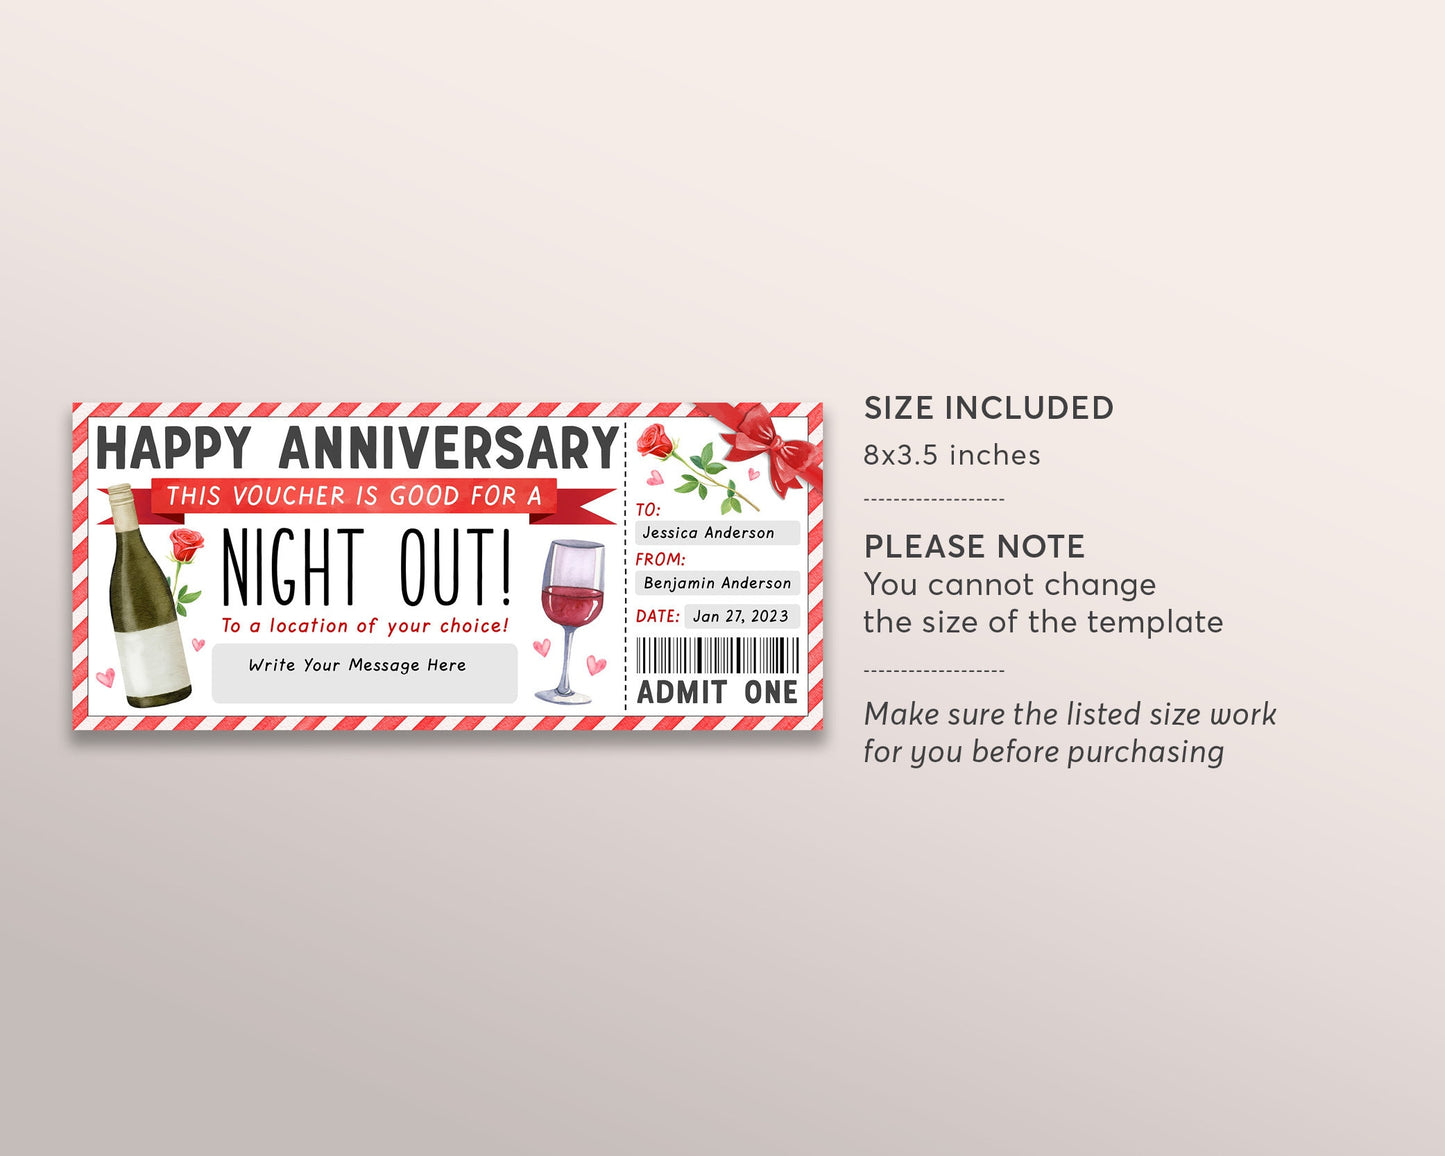 Night Out Gift Voucher Ticket Editable Template, Anniversary Surprise Restaurant Dinner Date For Wife Gift Certificate, Last Minute Gift